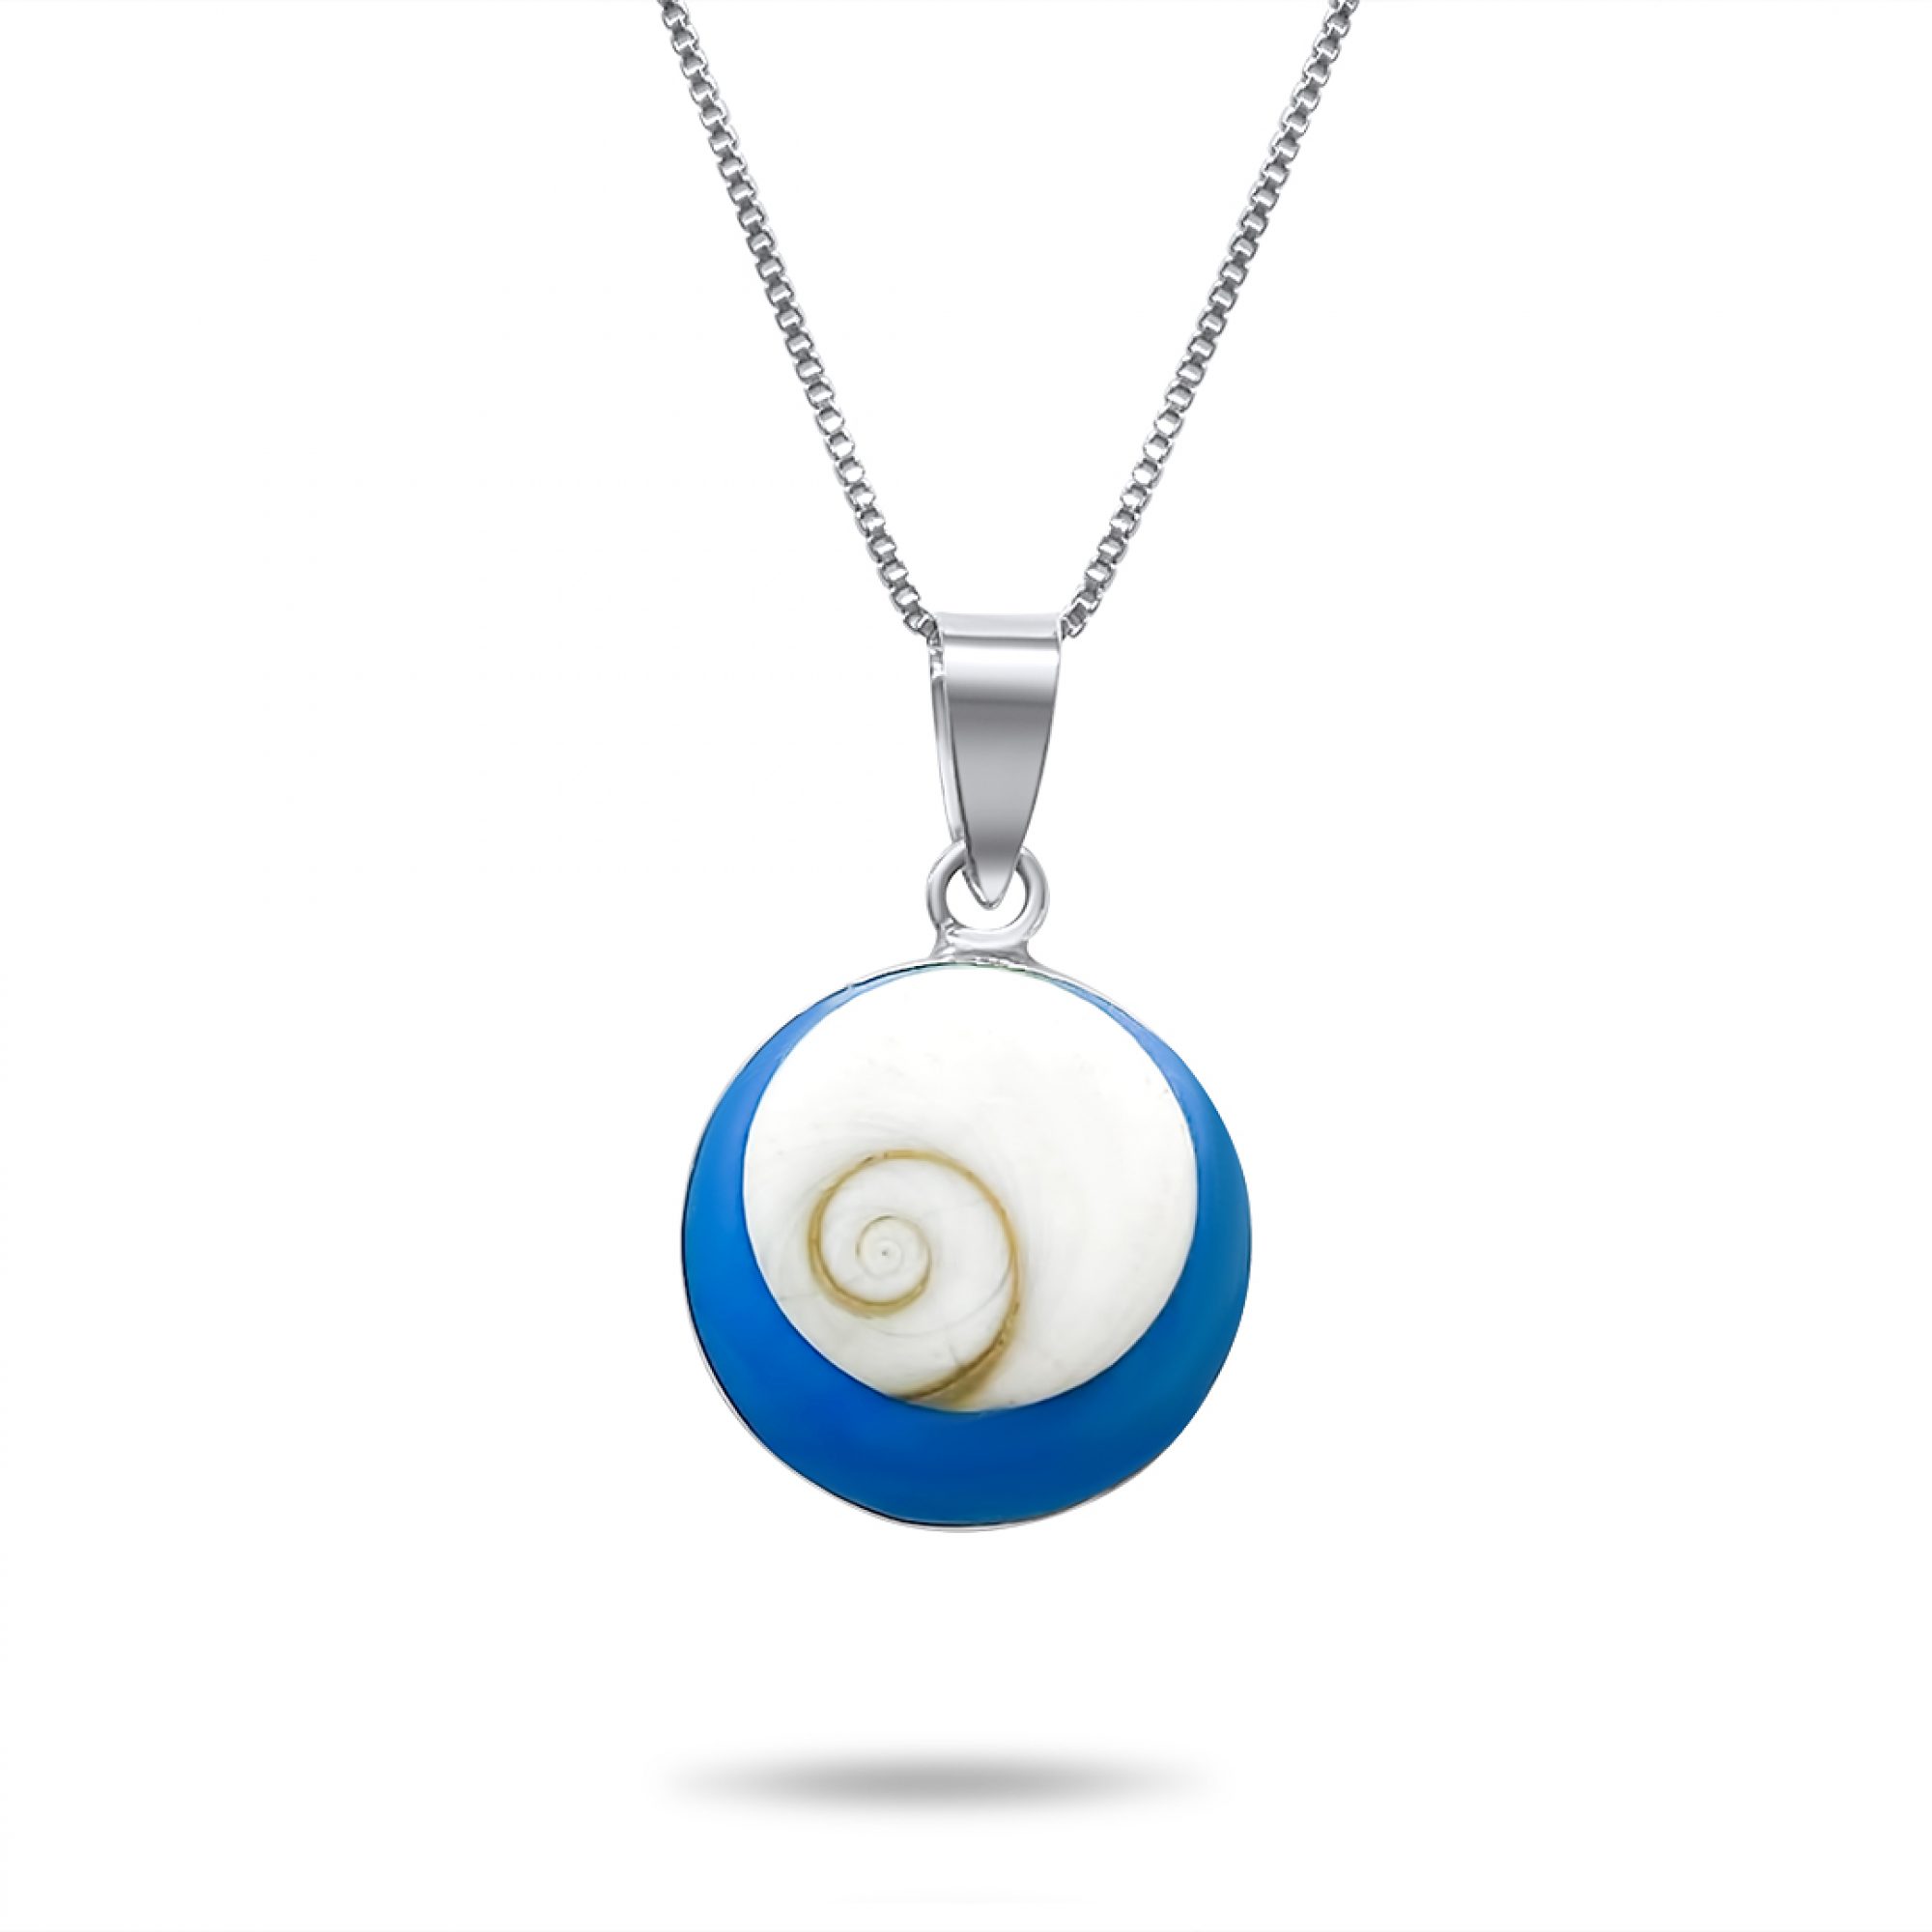 Eye of the sea necklace with turquoise stone